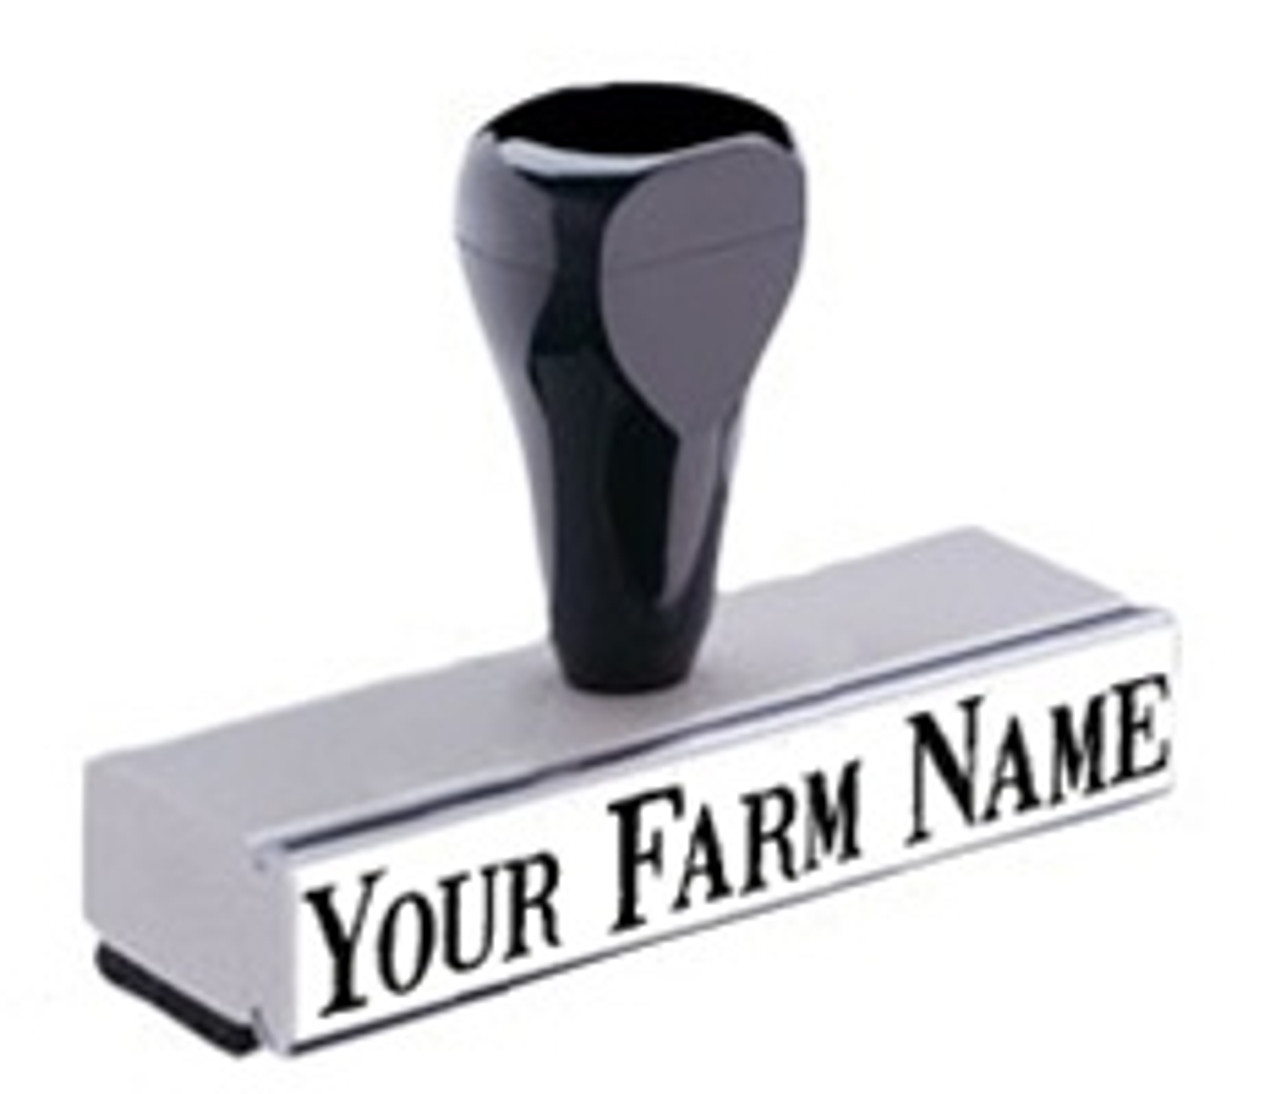  Self Inking Stamp for Personalized Egg Box Saying Farm Fresh  Egg Carton Stamp Then Your Farm Name as a Custom Stamps Self Inking for  Business Large Rubber Custom Stamp Size